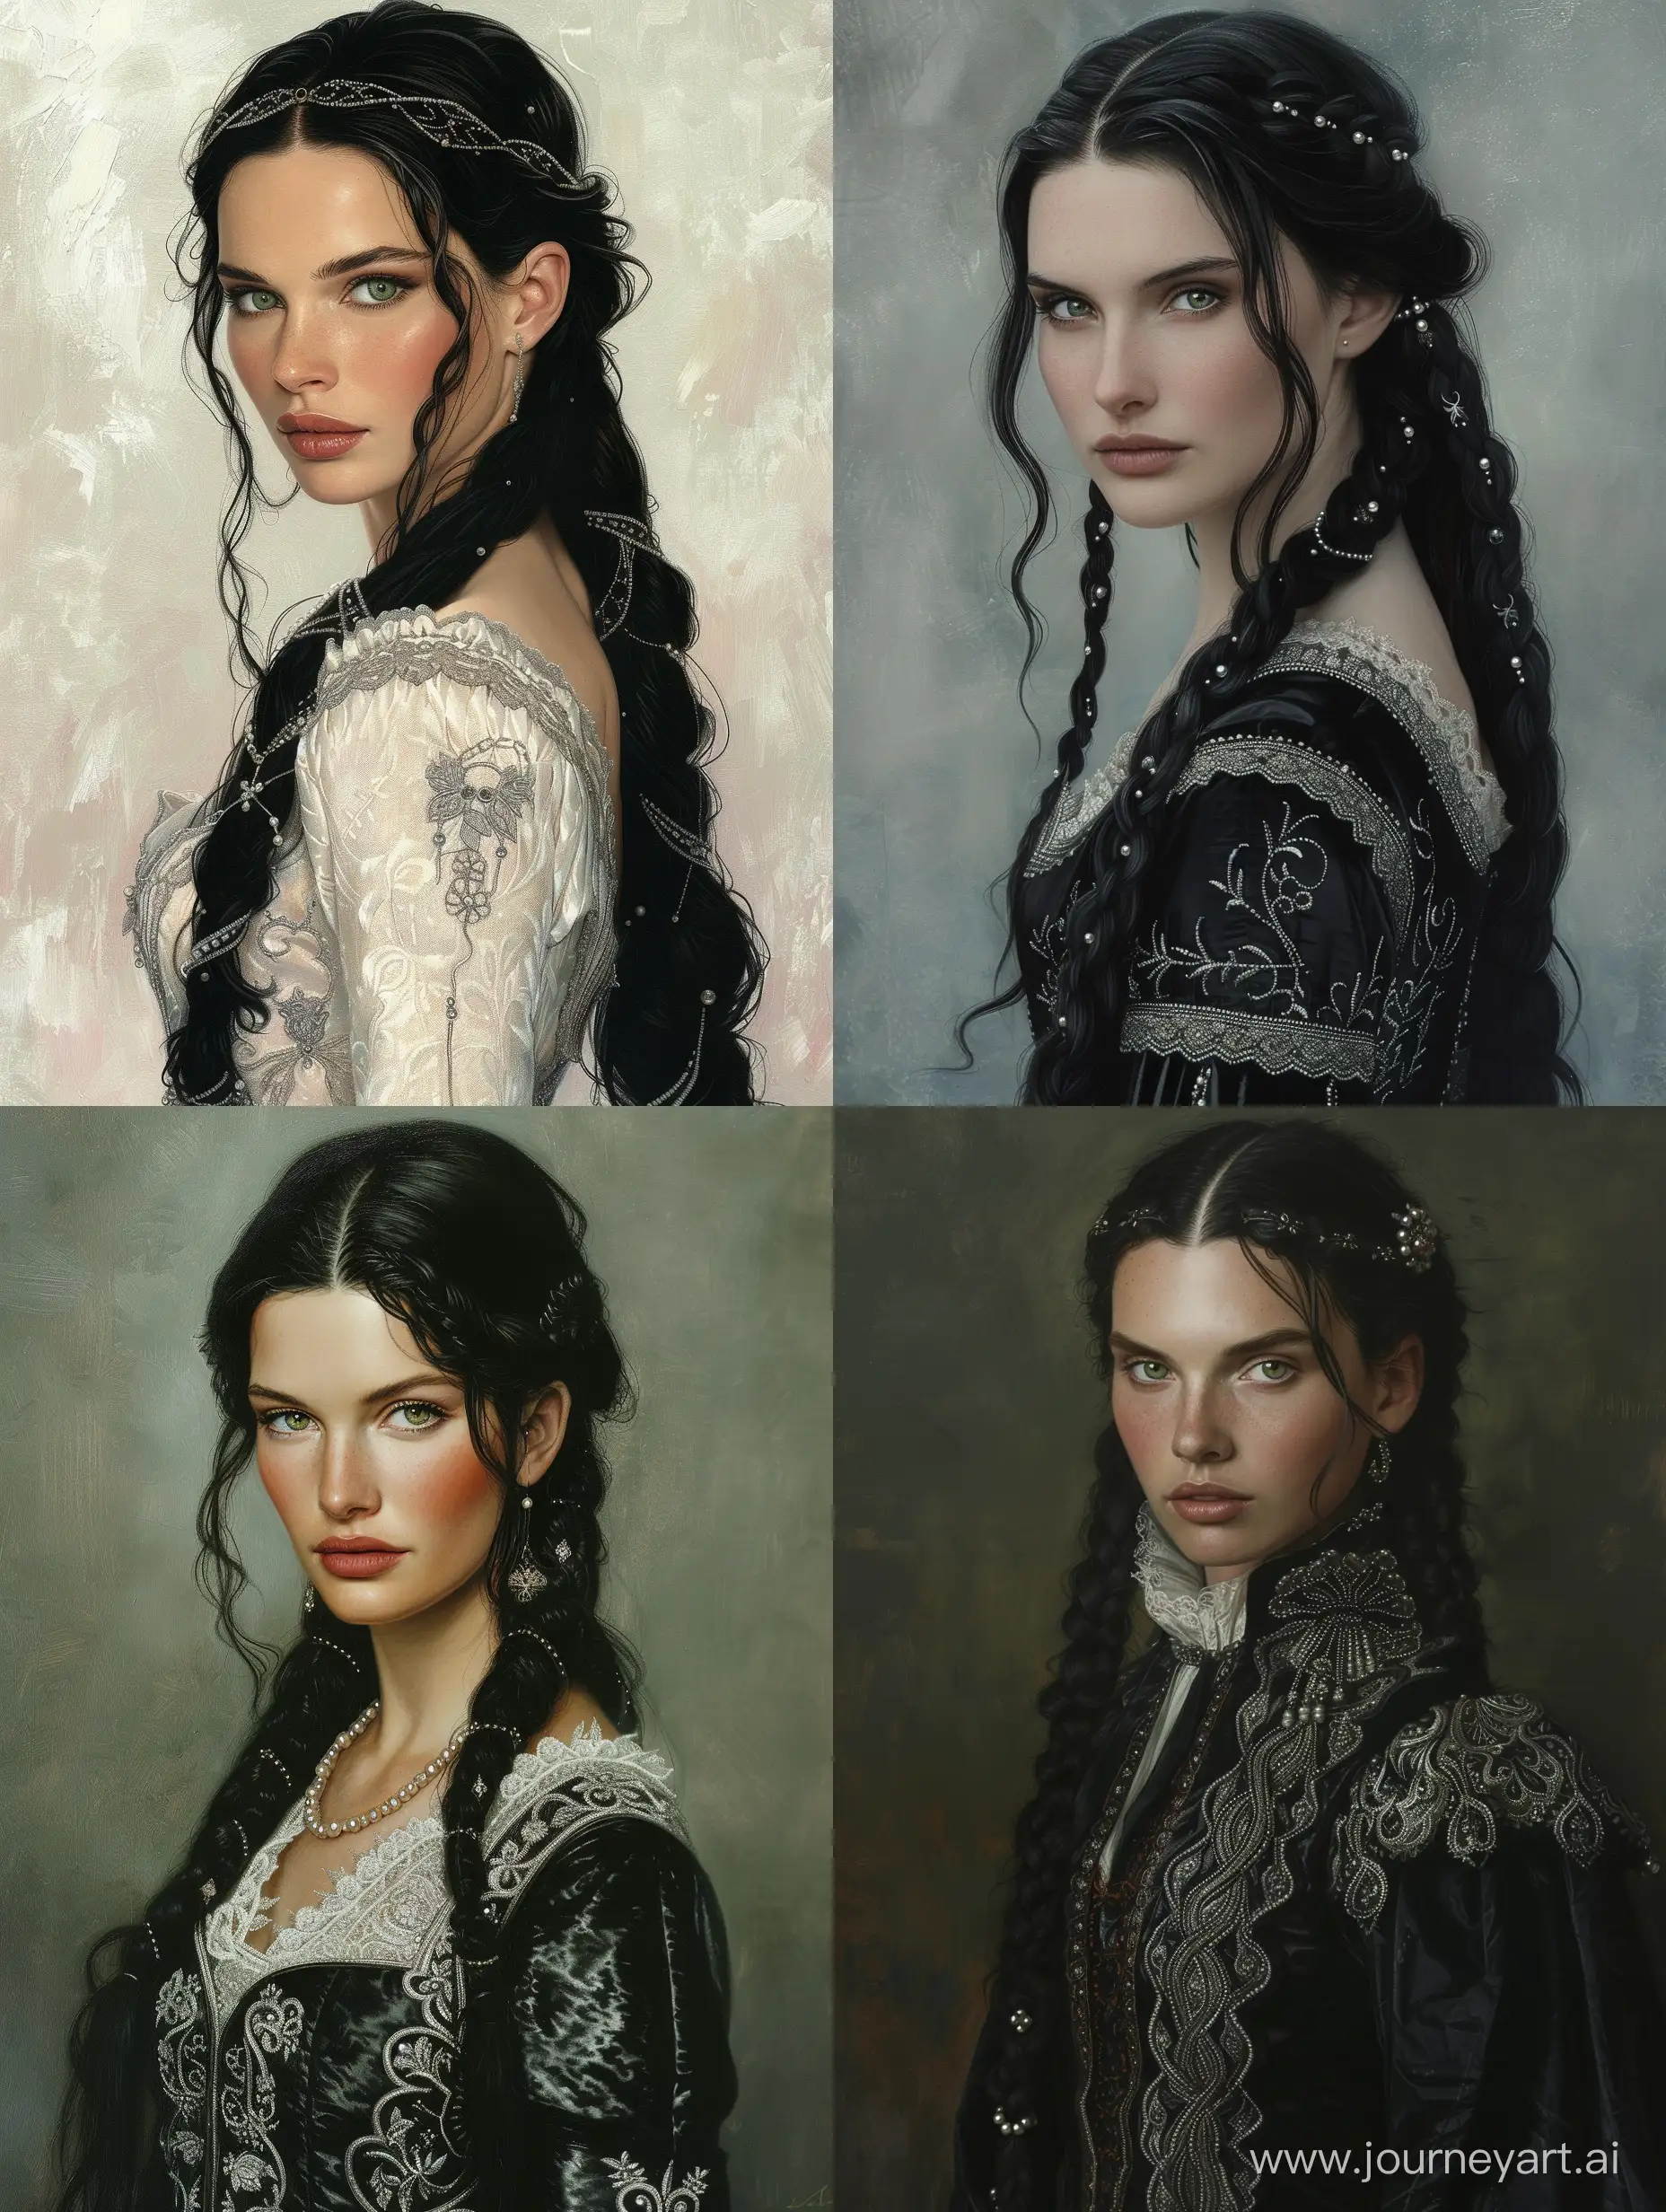 Portrait-of-a-Dutchess-with-RavenBlack-Hair-and-Intricate-Silver-Embroidery